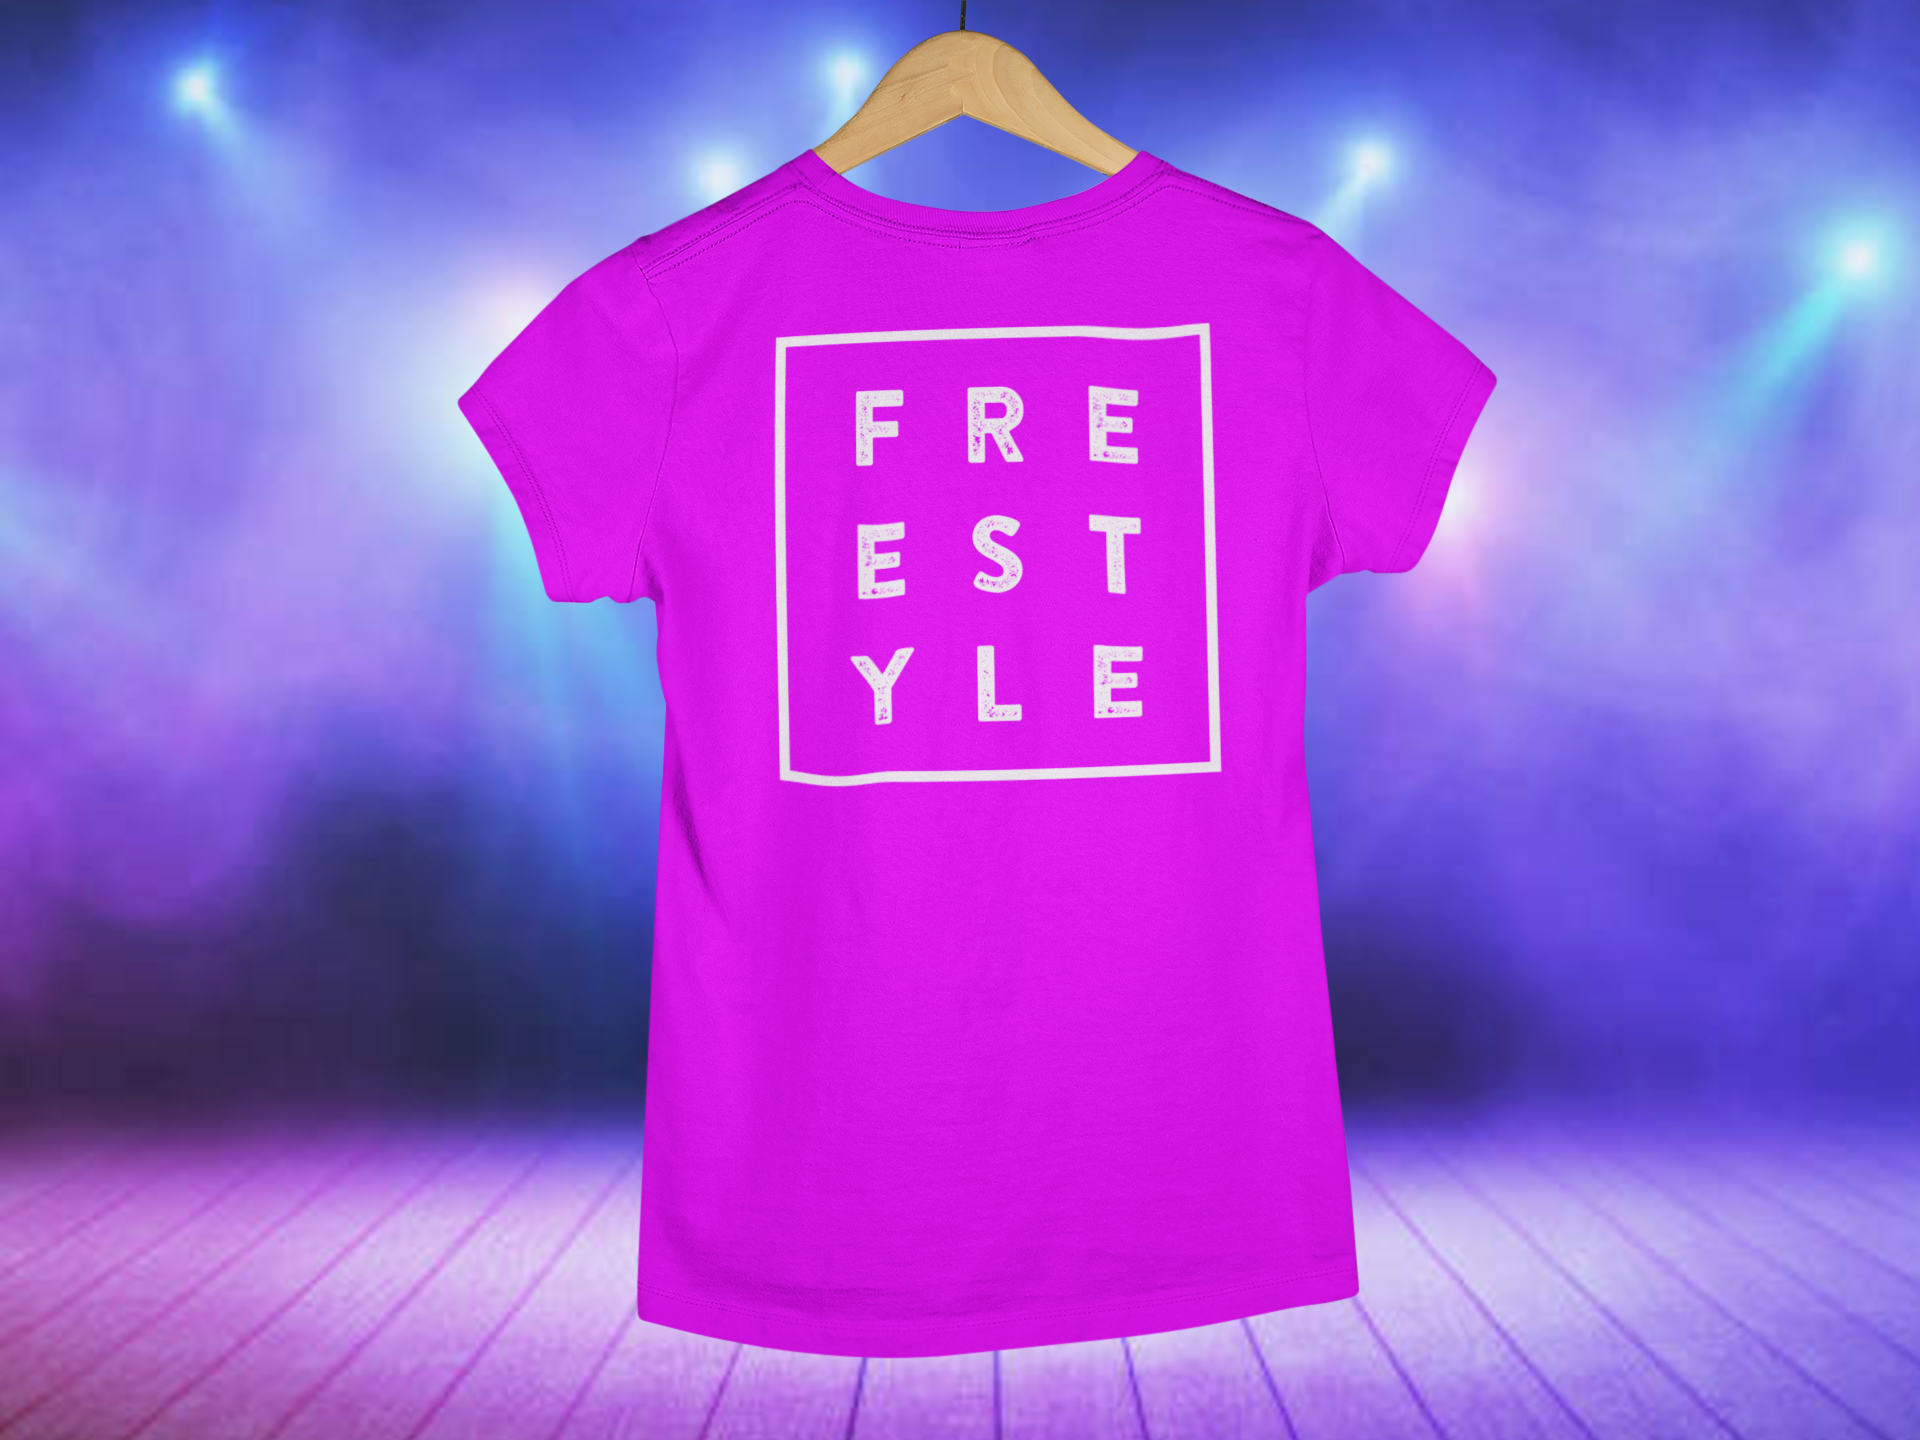 Brought to you by "TONY TKA” FREESTYLE Logo Tee.